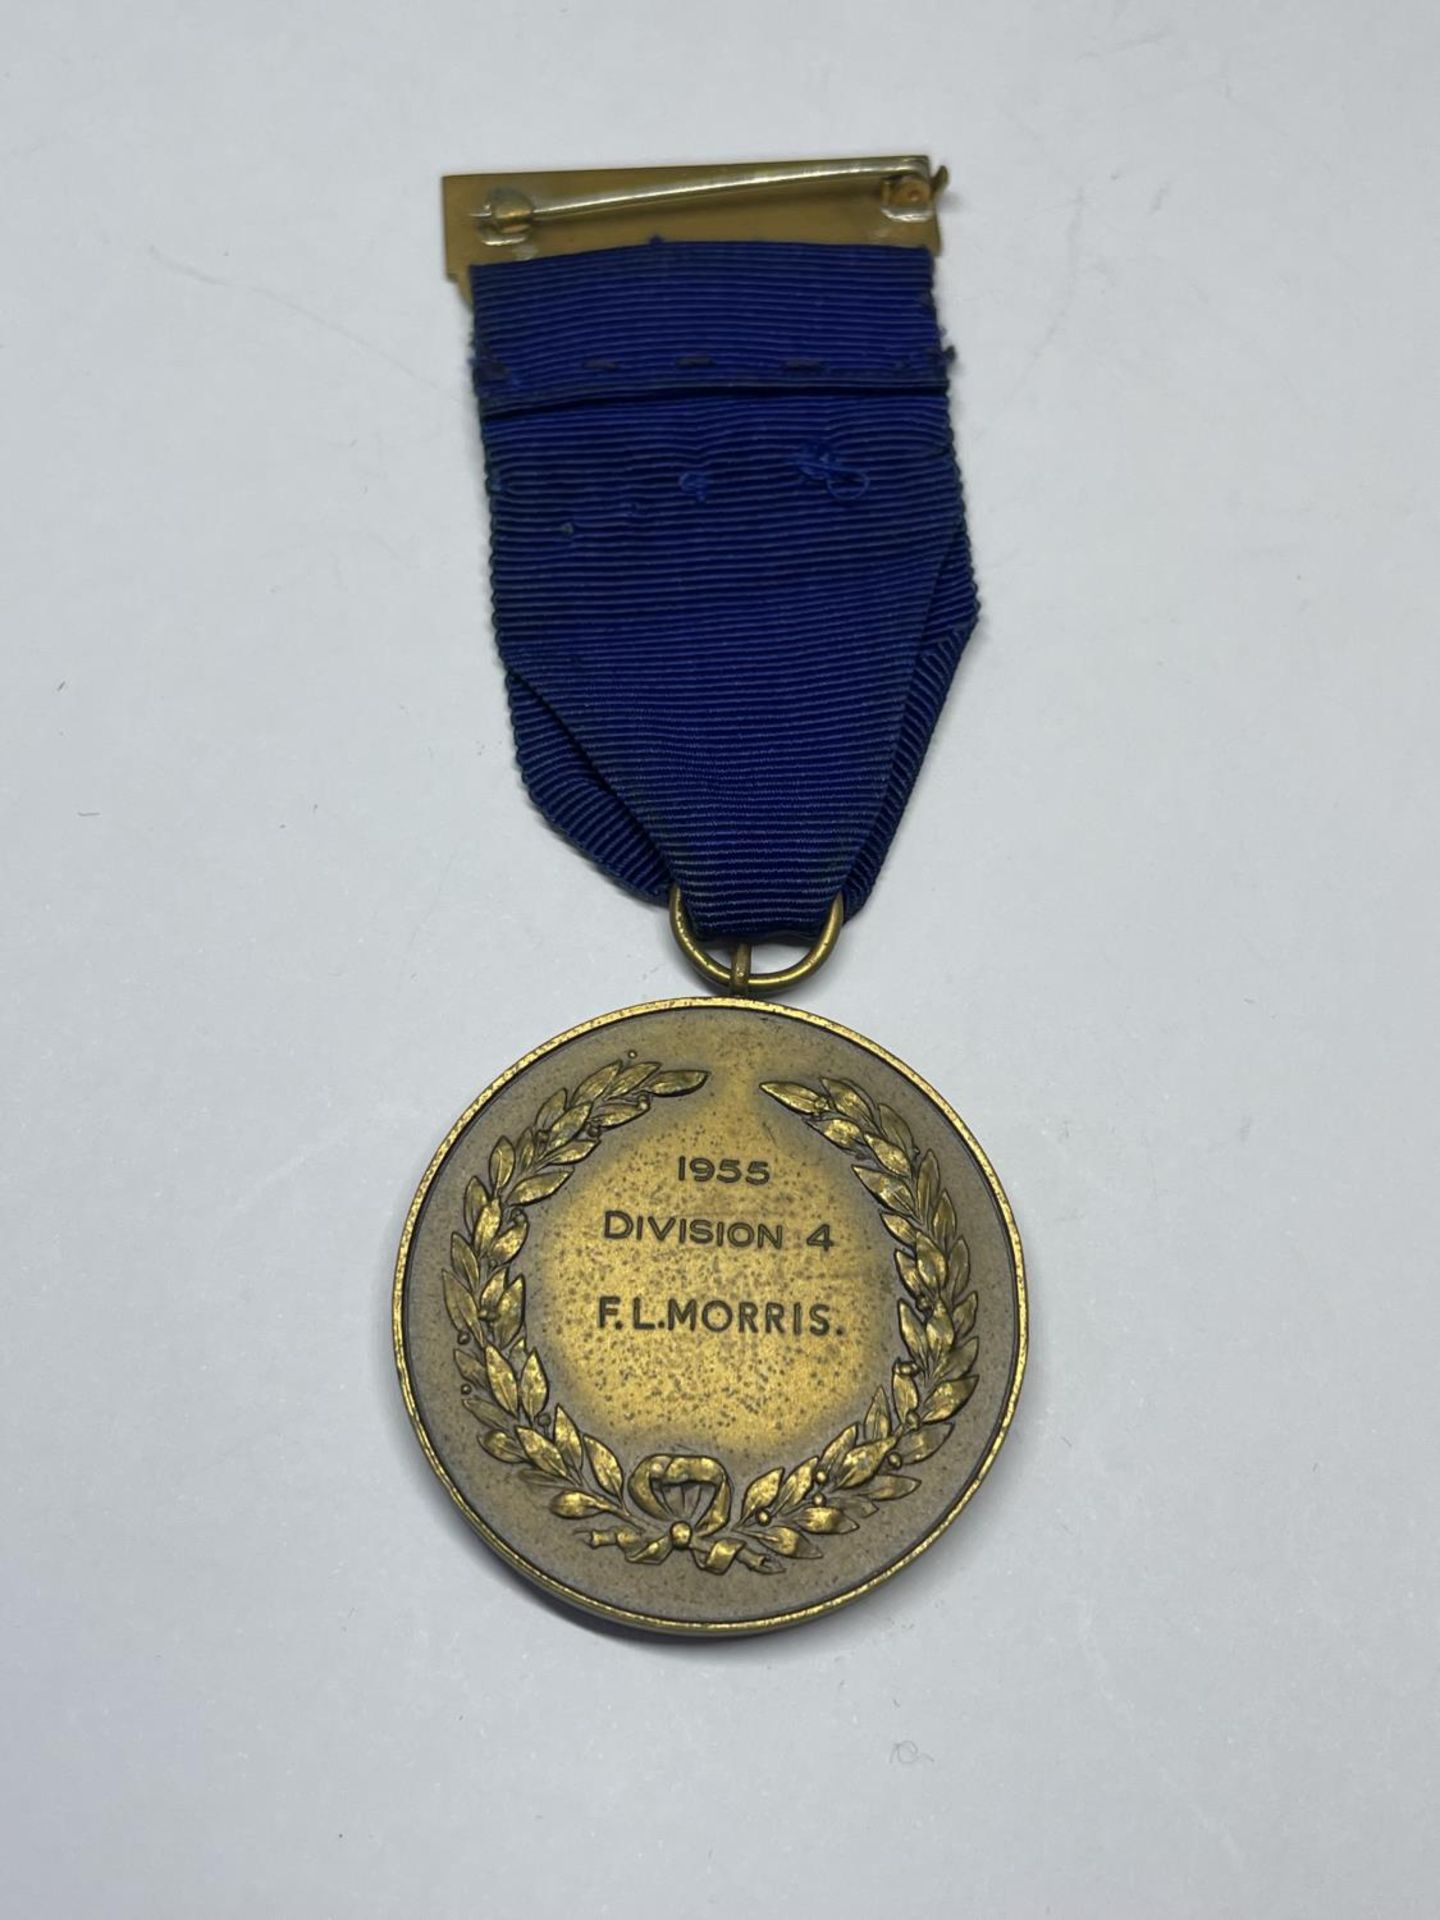 A STAFFORDSHIRE COUNTY RIFLE MEDAL - Image 2 of 2